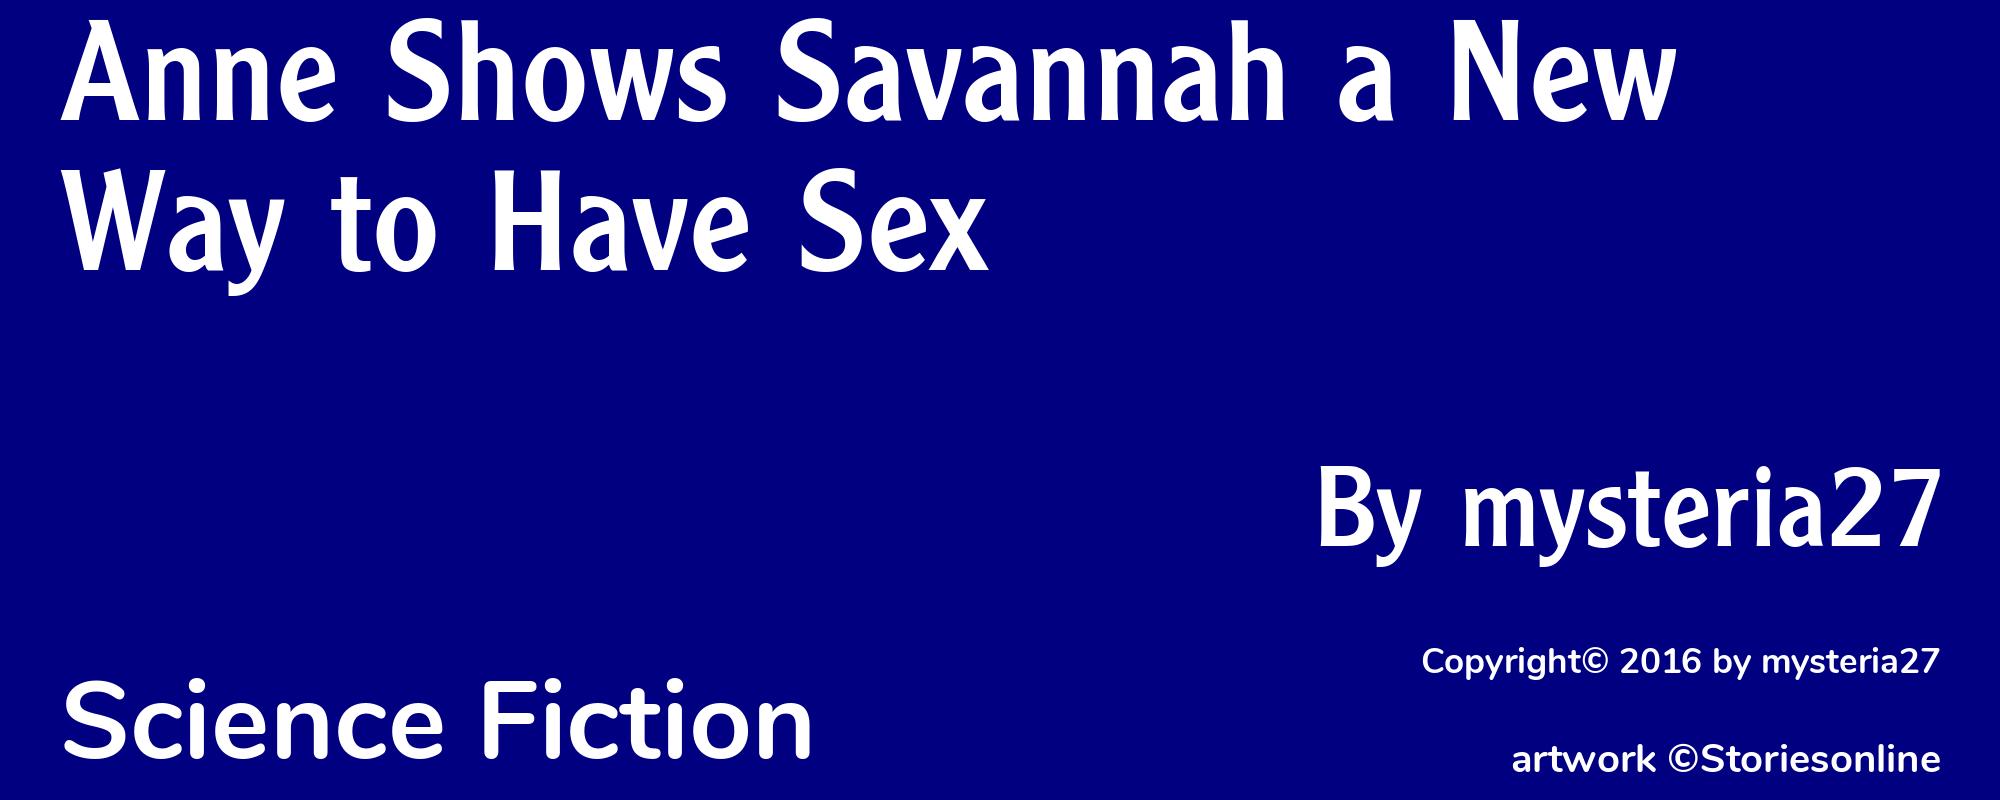 Anne Shows Savannah a New Way to Have Sex - Cover